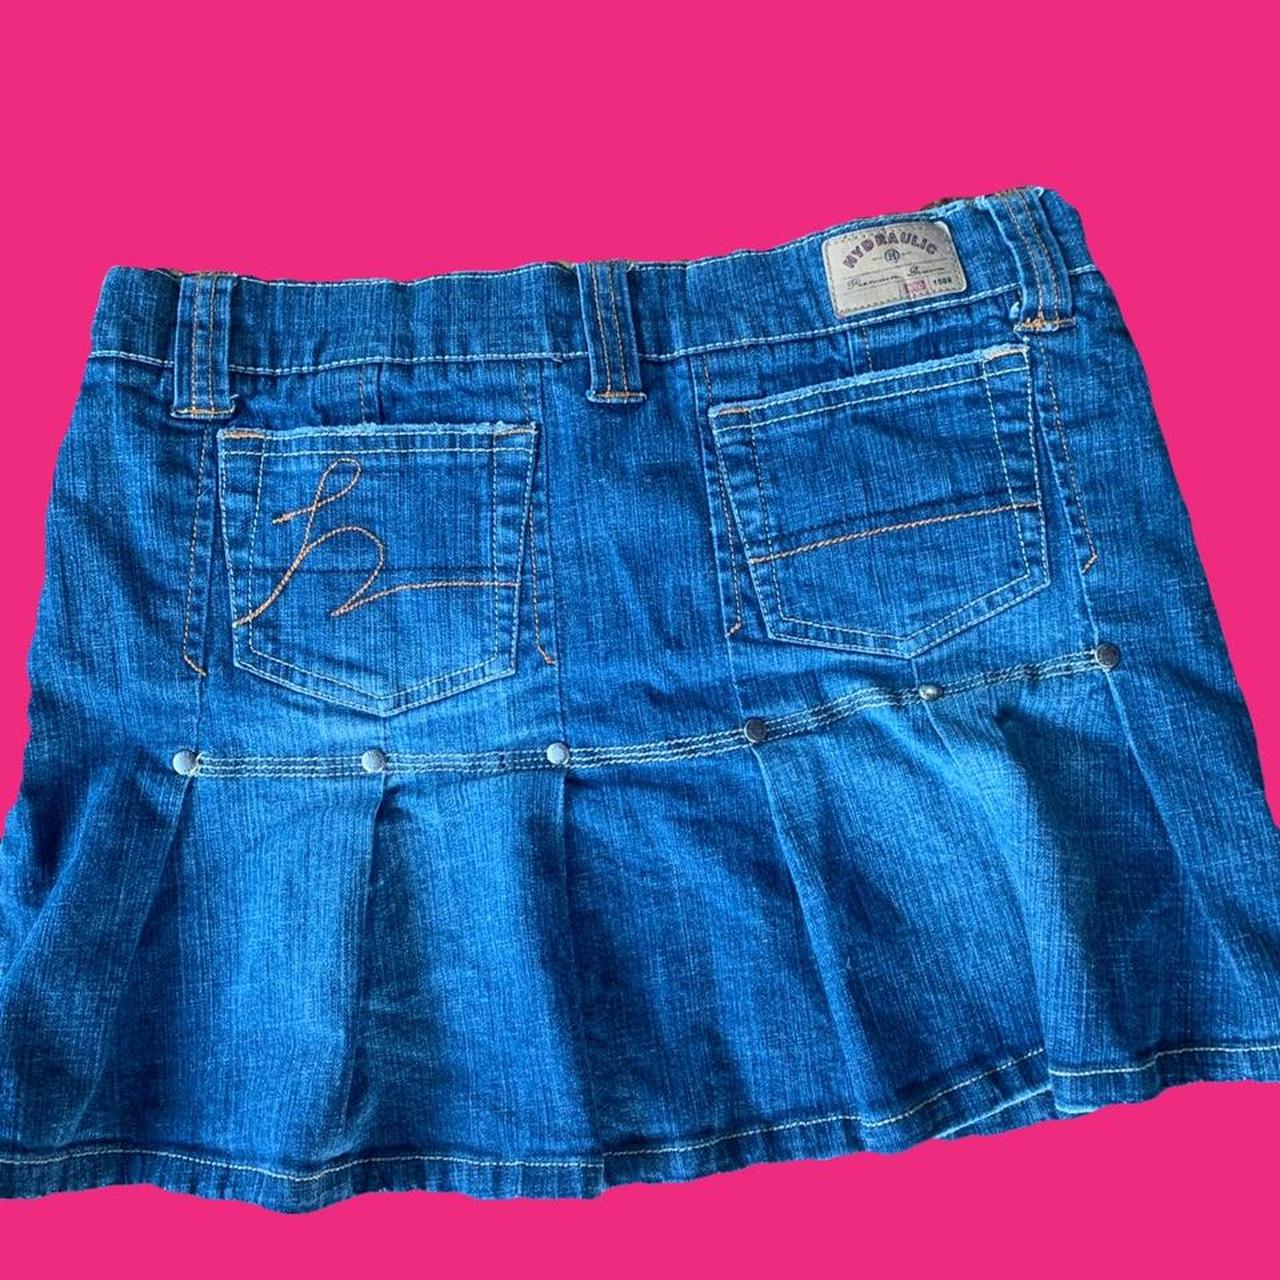 adorable y2k denim mini skirt with pleats in the... - Depop